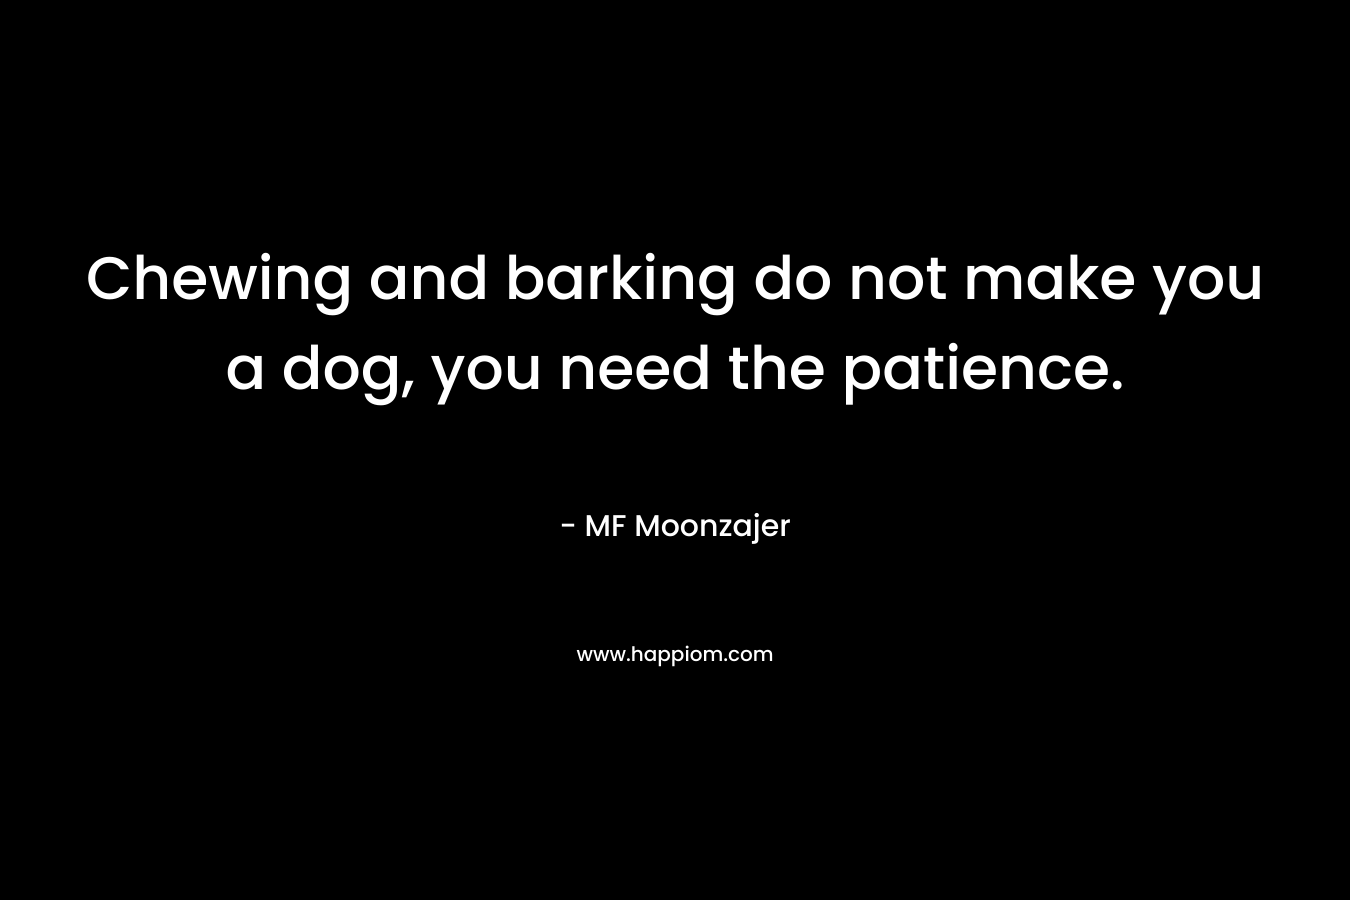 Chewing and barking do not make you a dog, you need the patience.